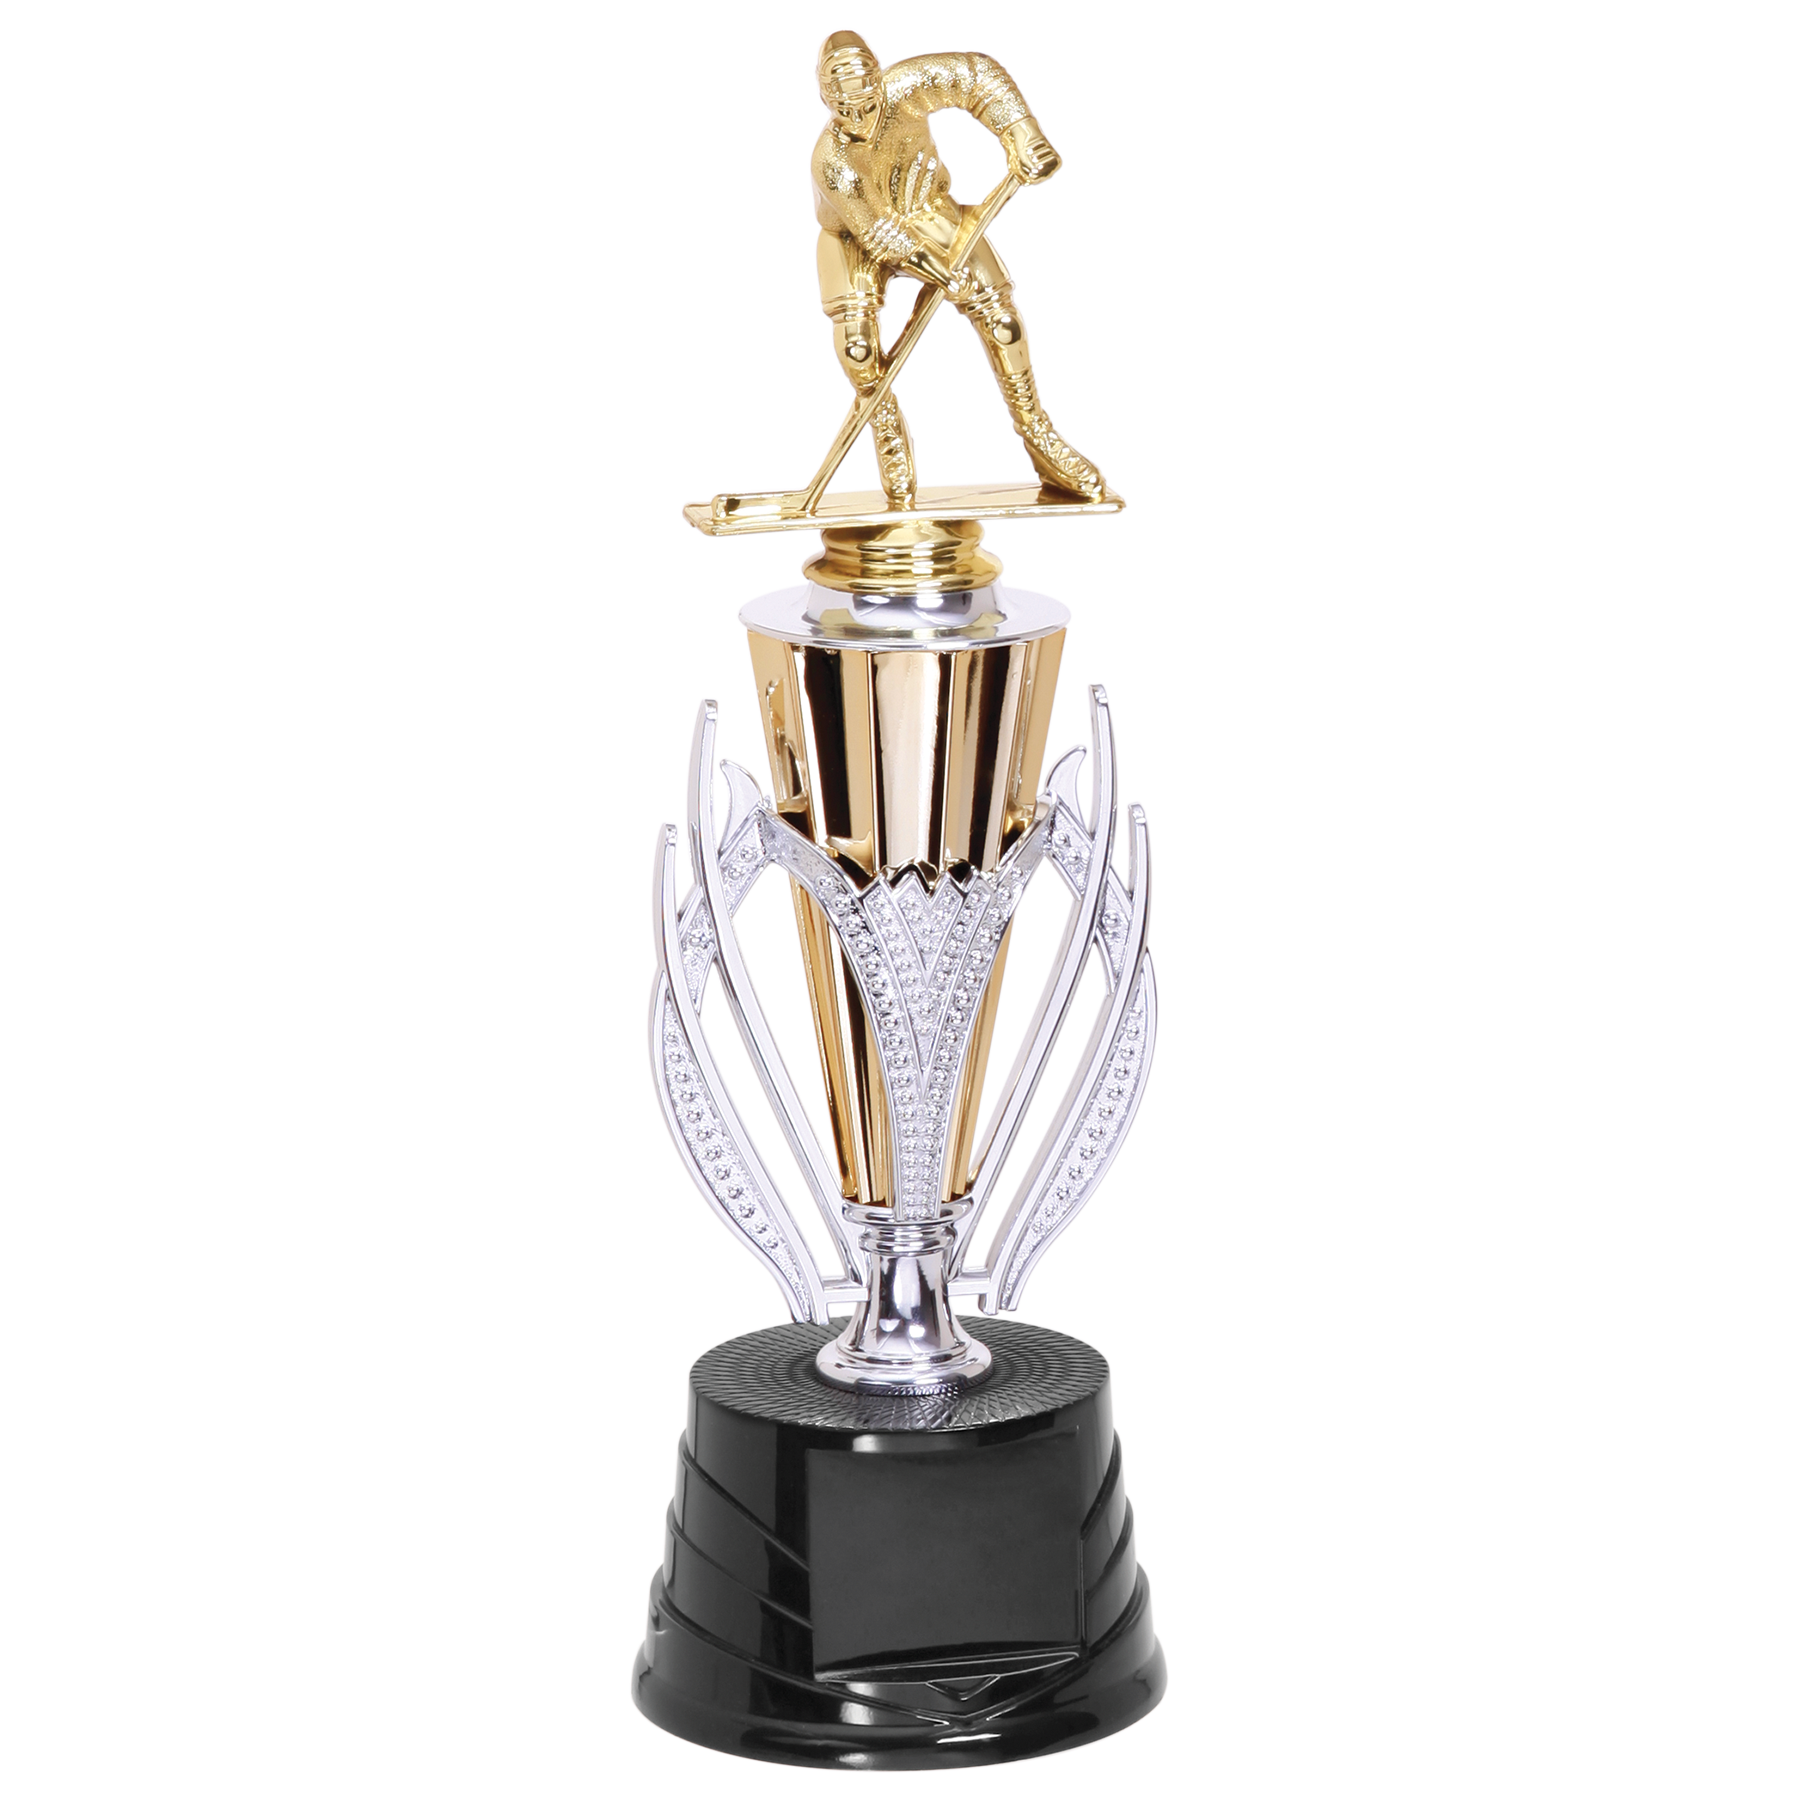 Hockey Cup Trophy | Impressive Trophies & Awards